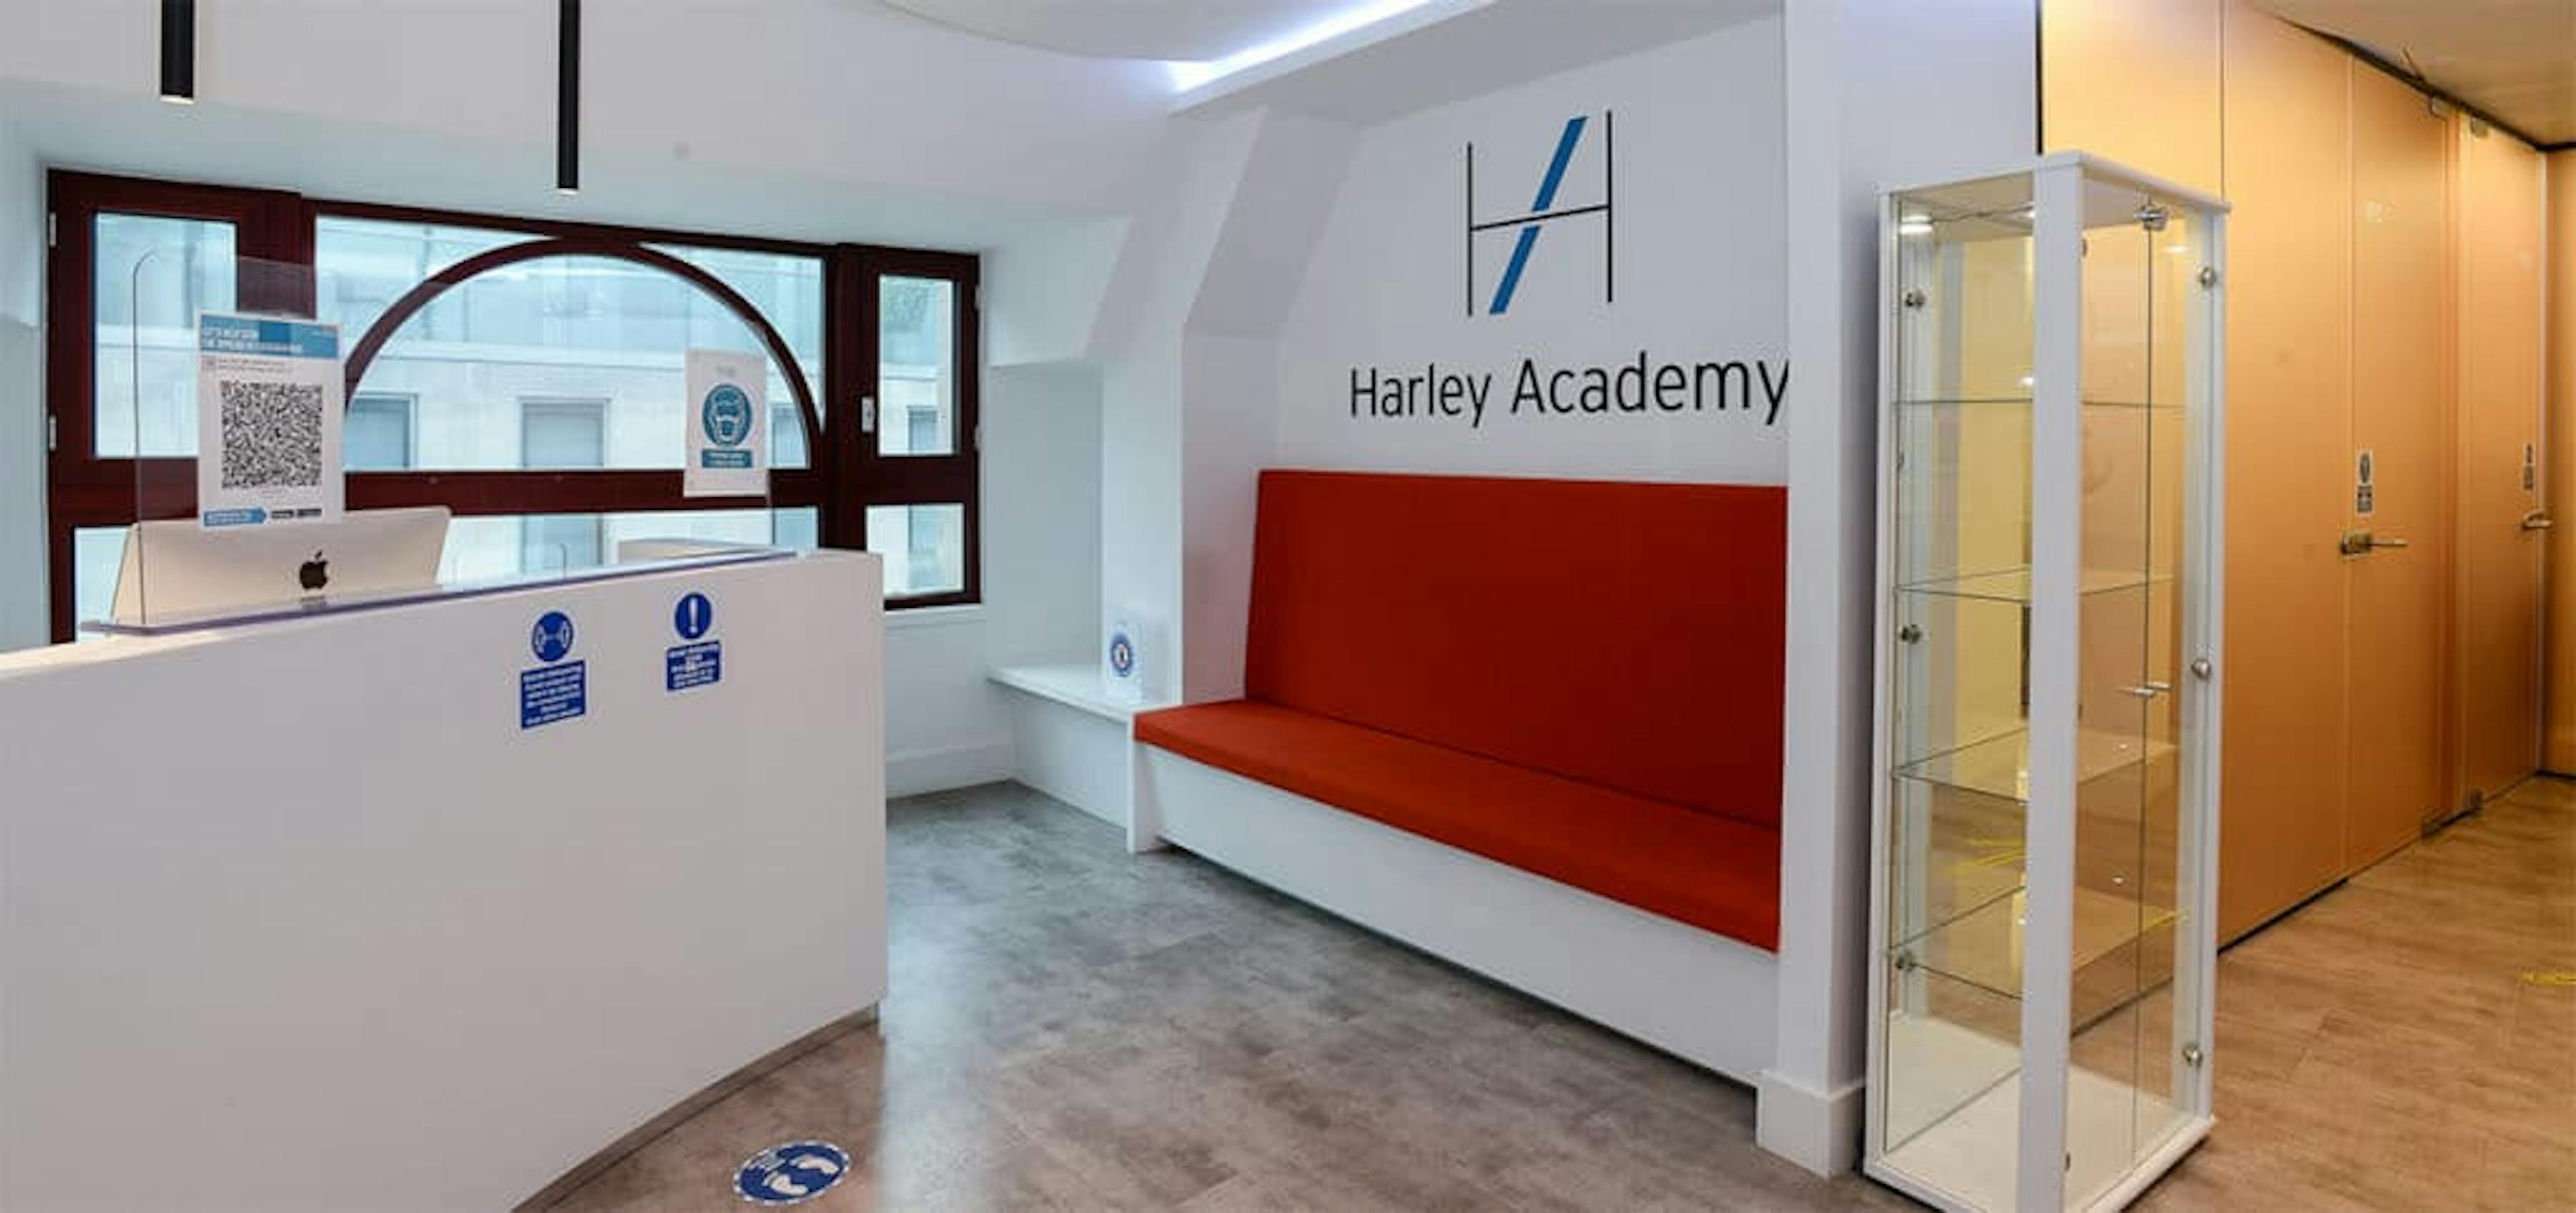 Harley Academy Clinic Getting ready to reopen